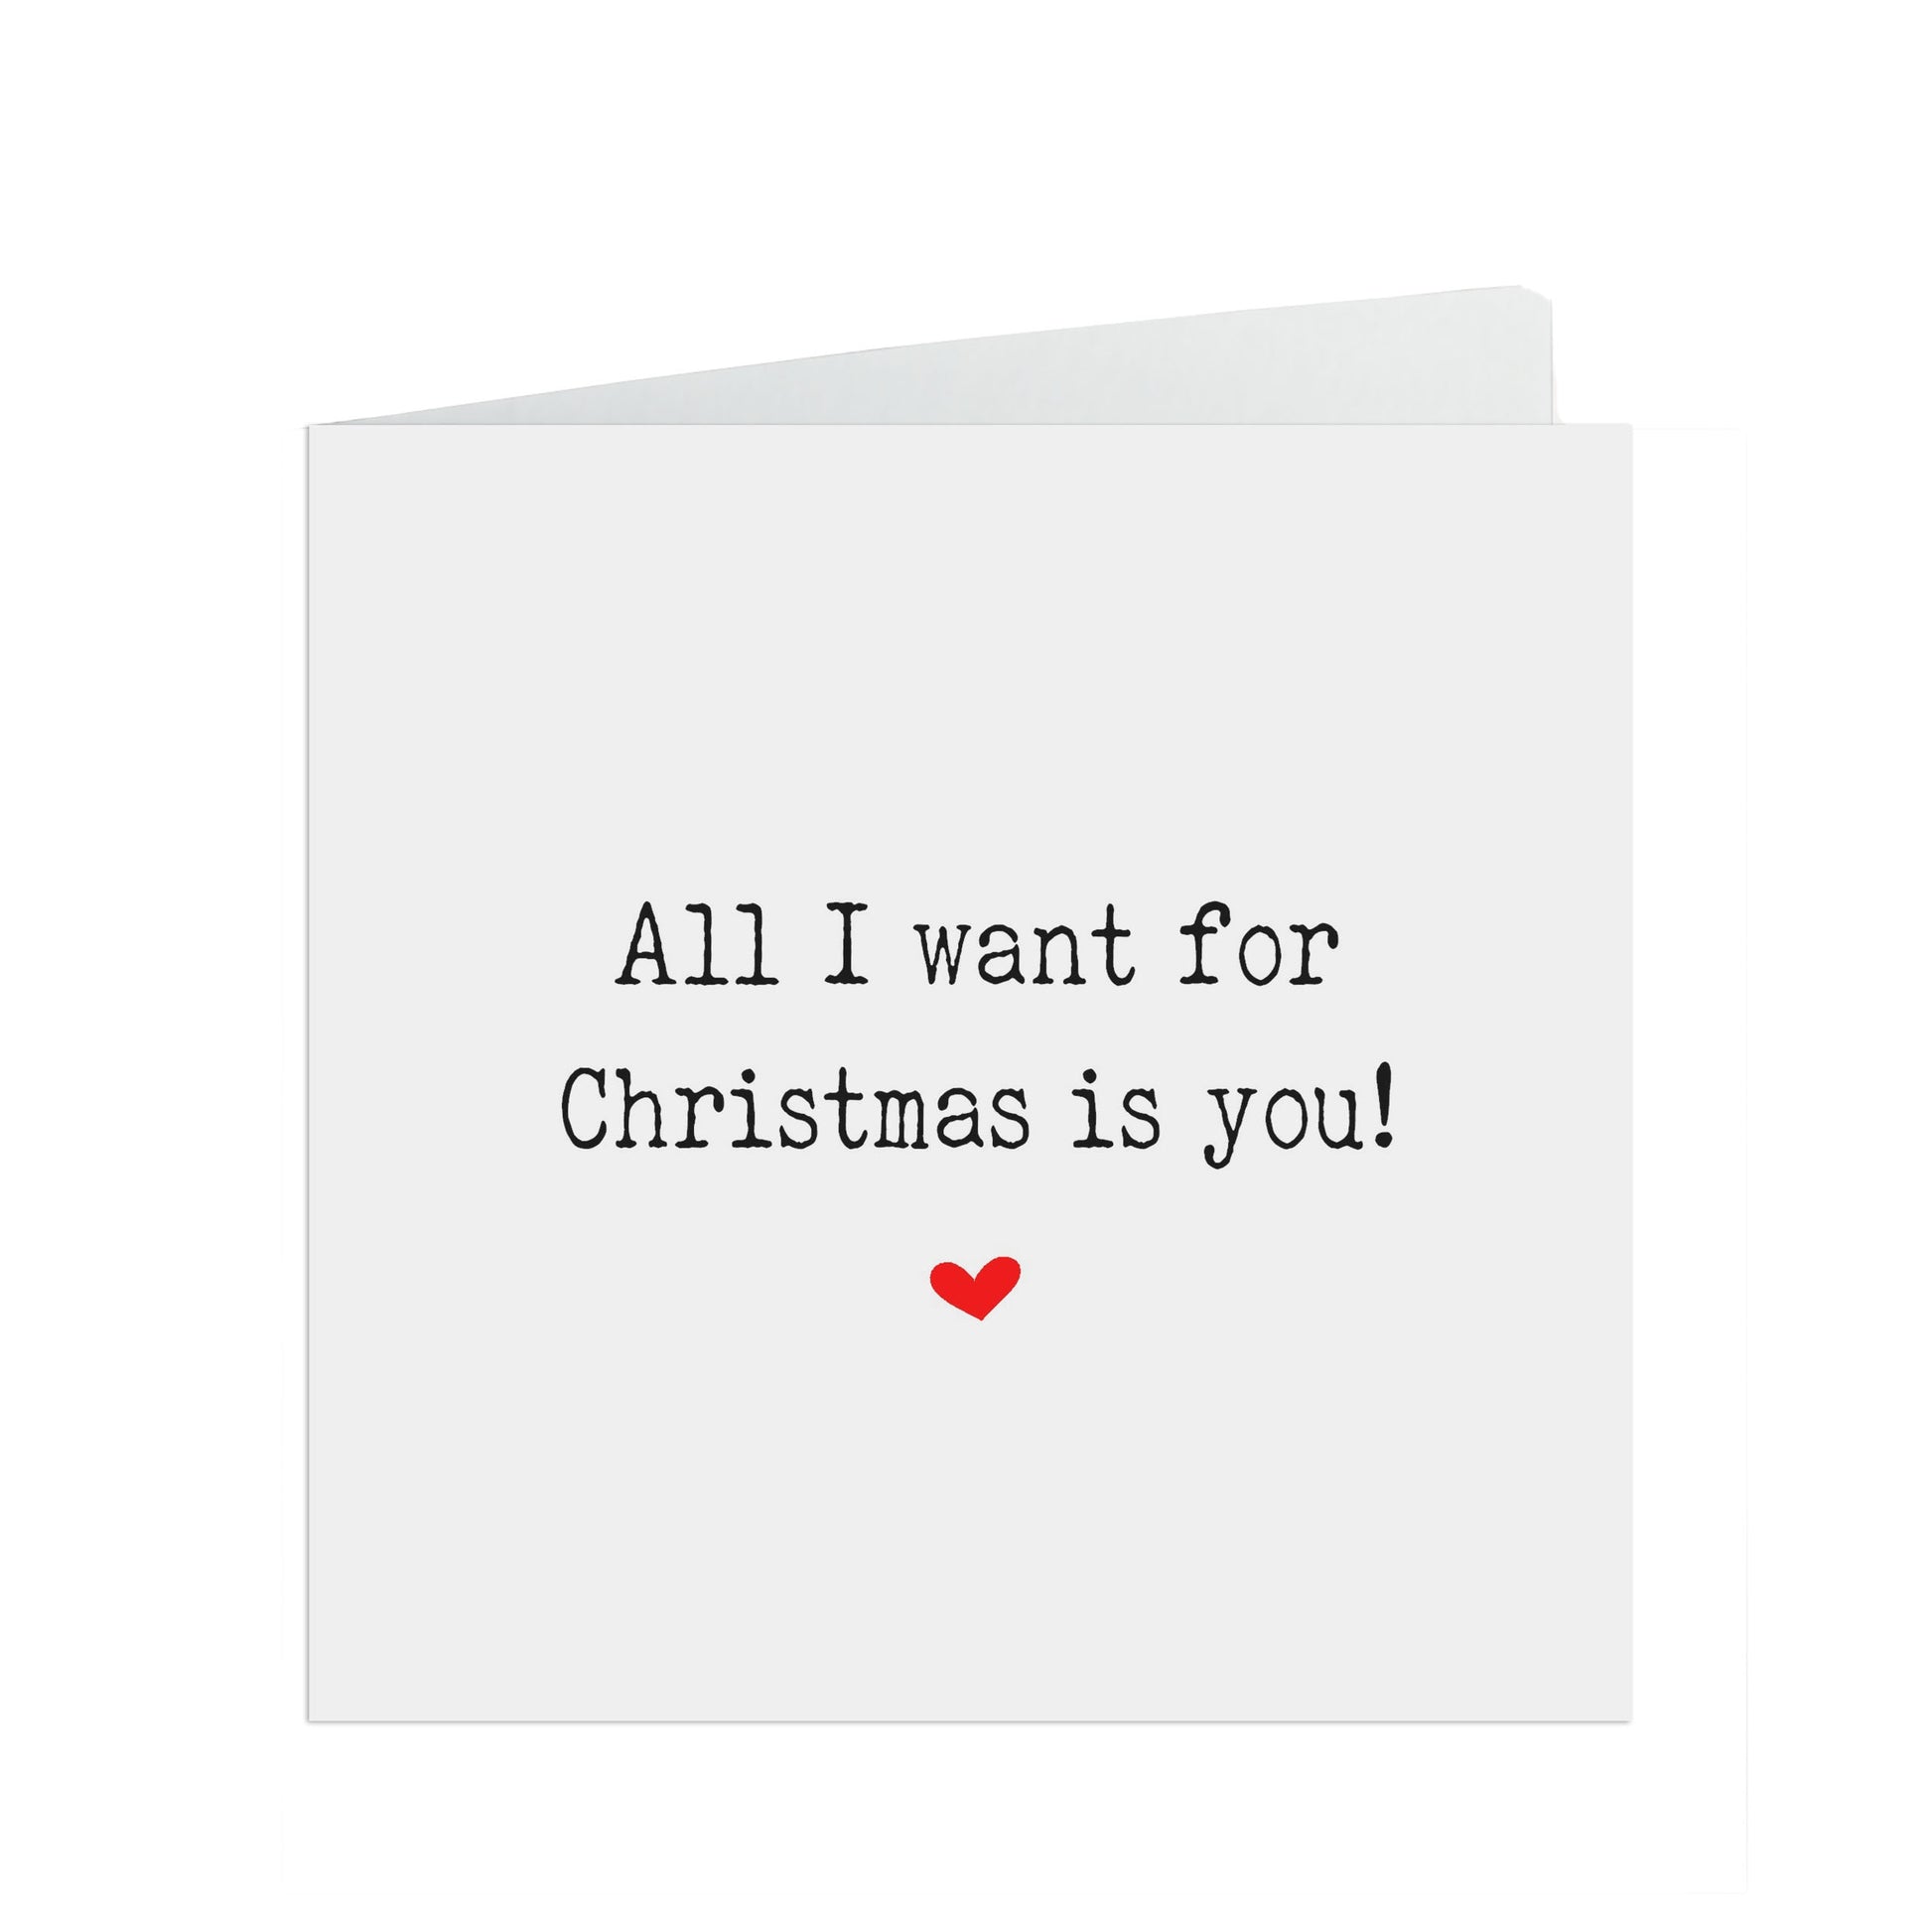 All I Want For Christmas Is You! Funny Christmas Card